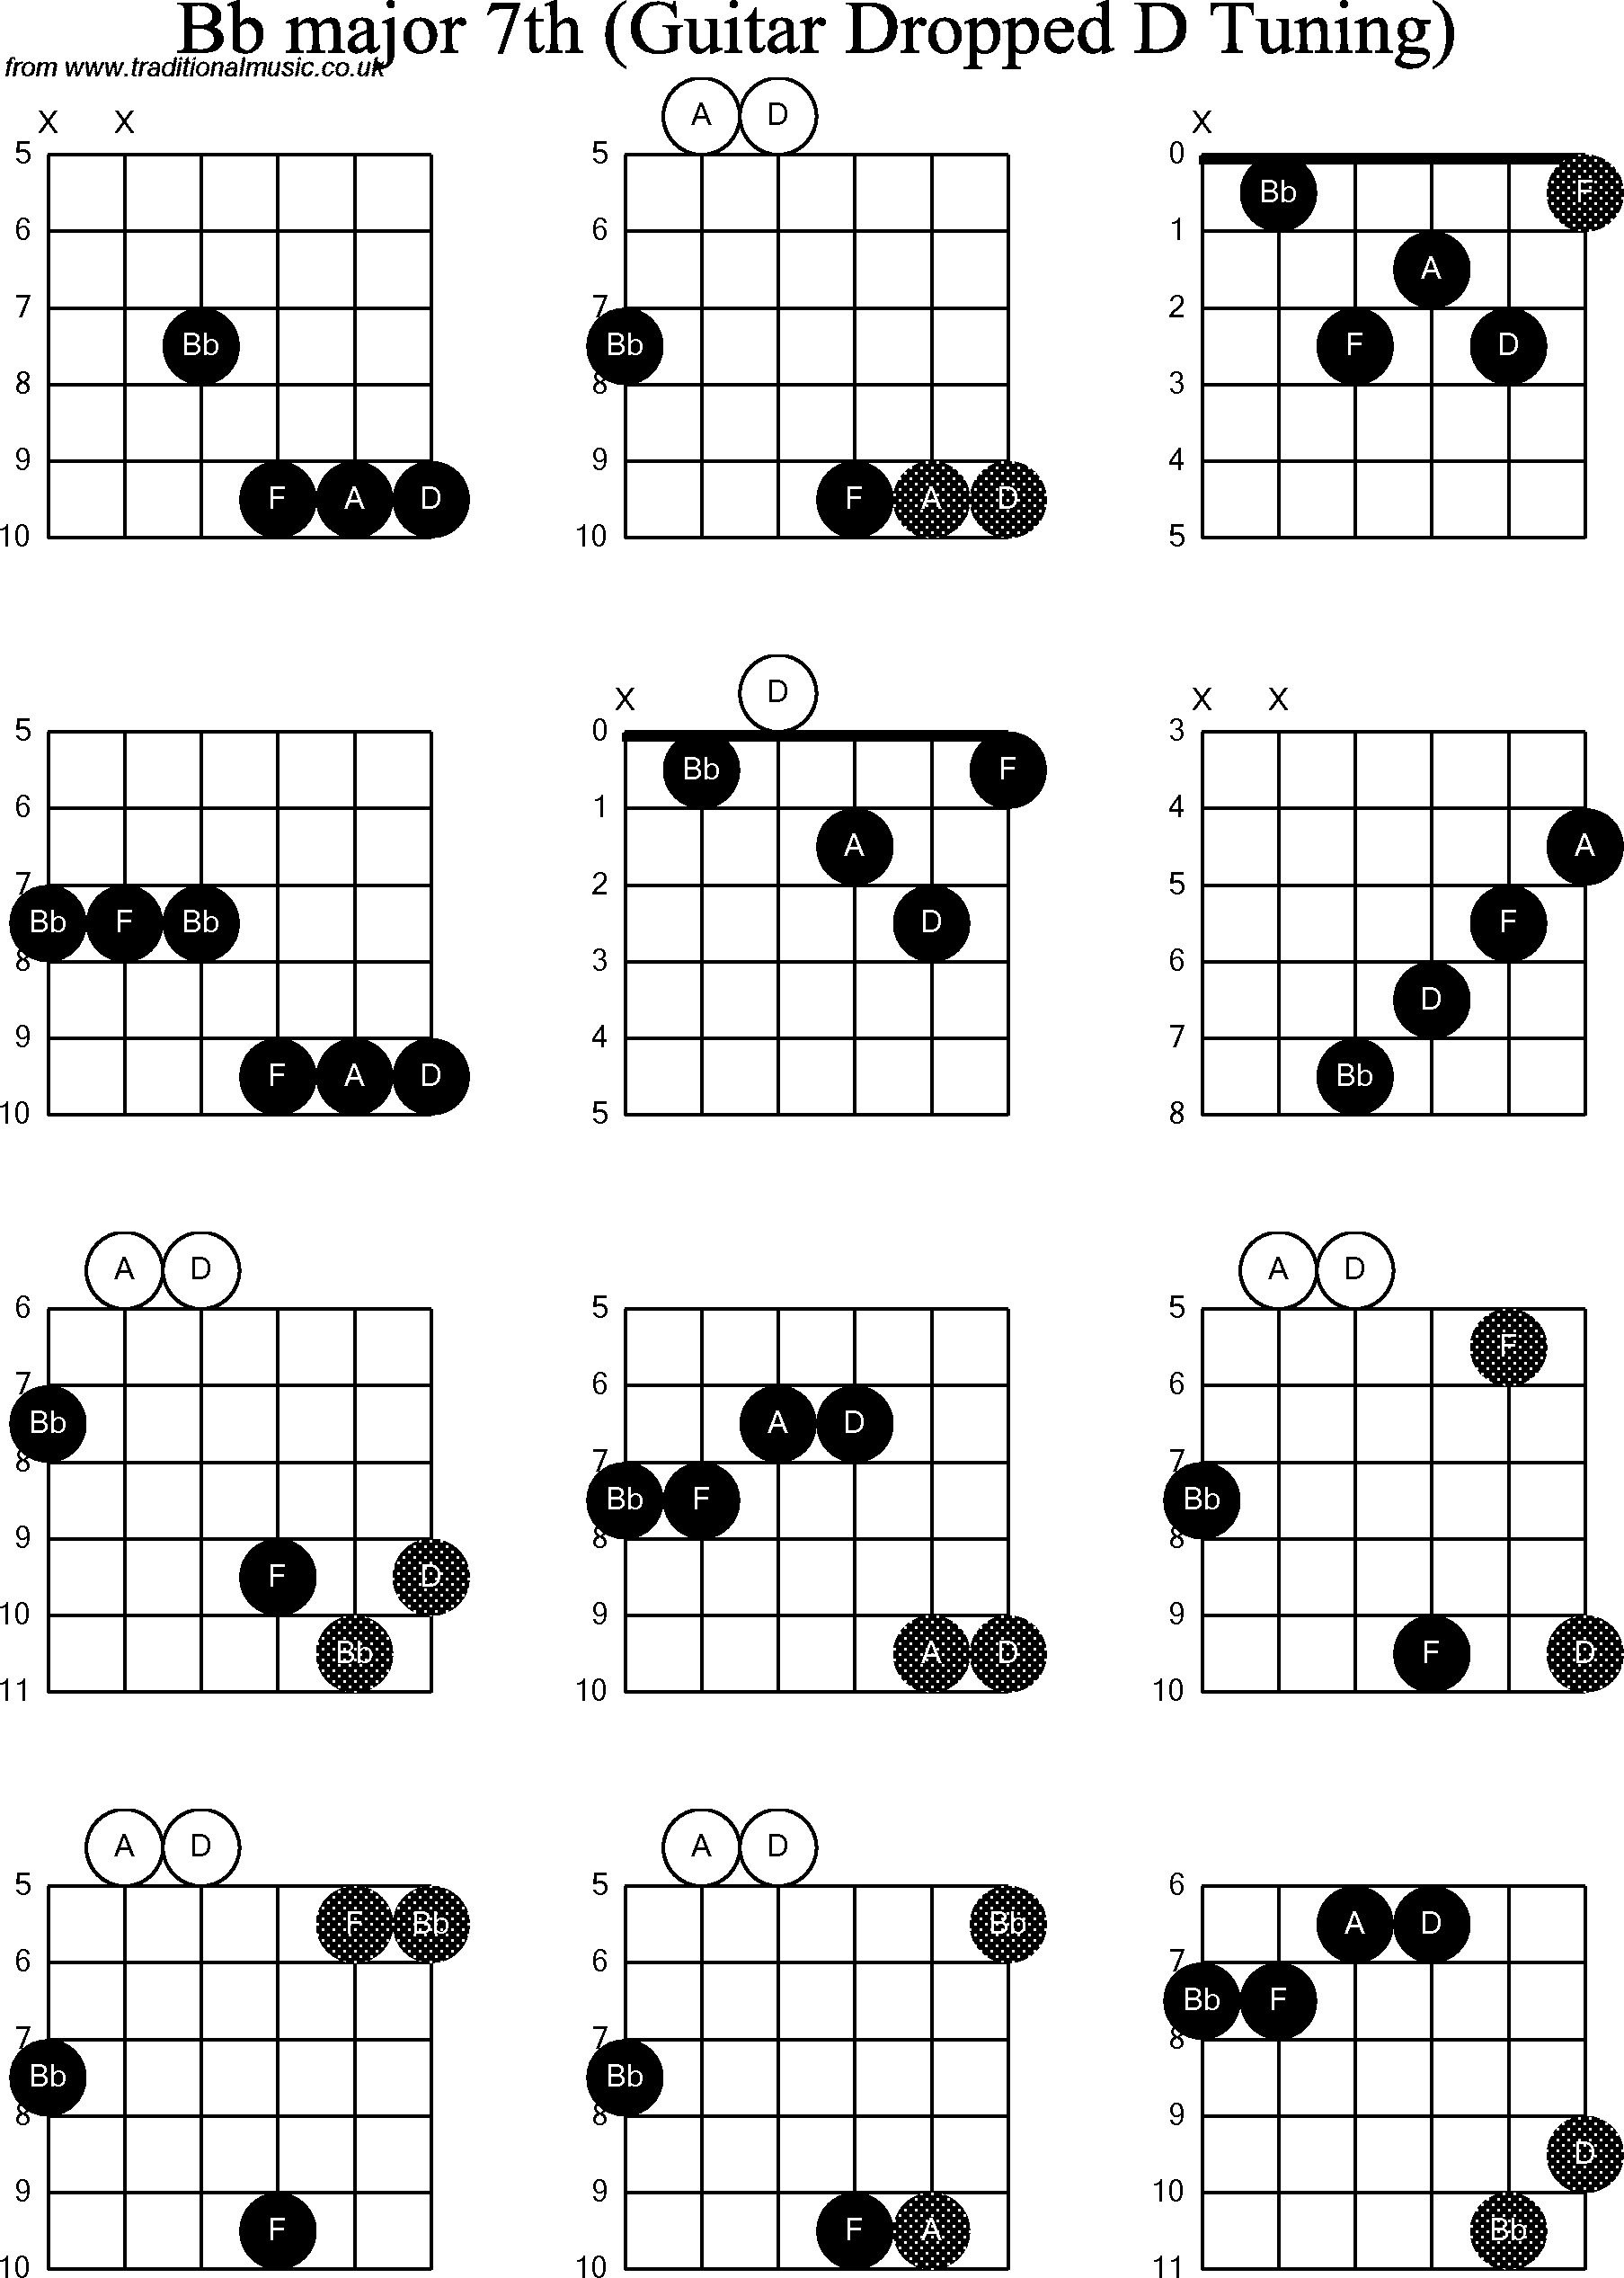 Chord diagrams for Dropped D Guitar(DADGBE), C Sharp Minor7th